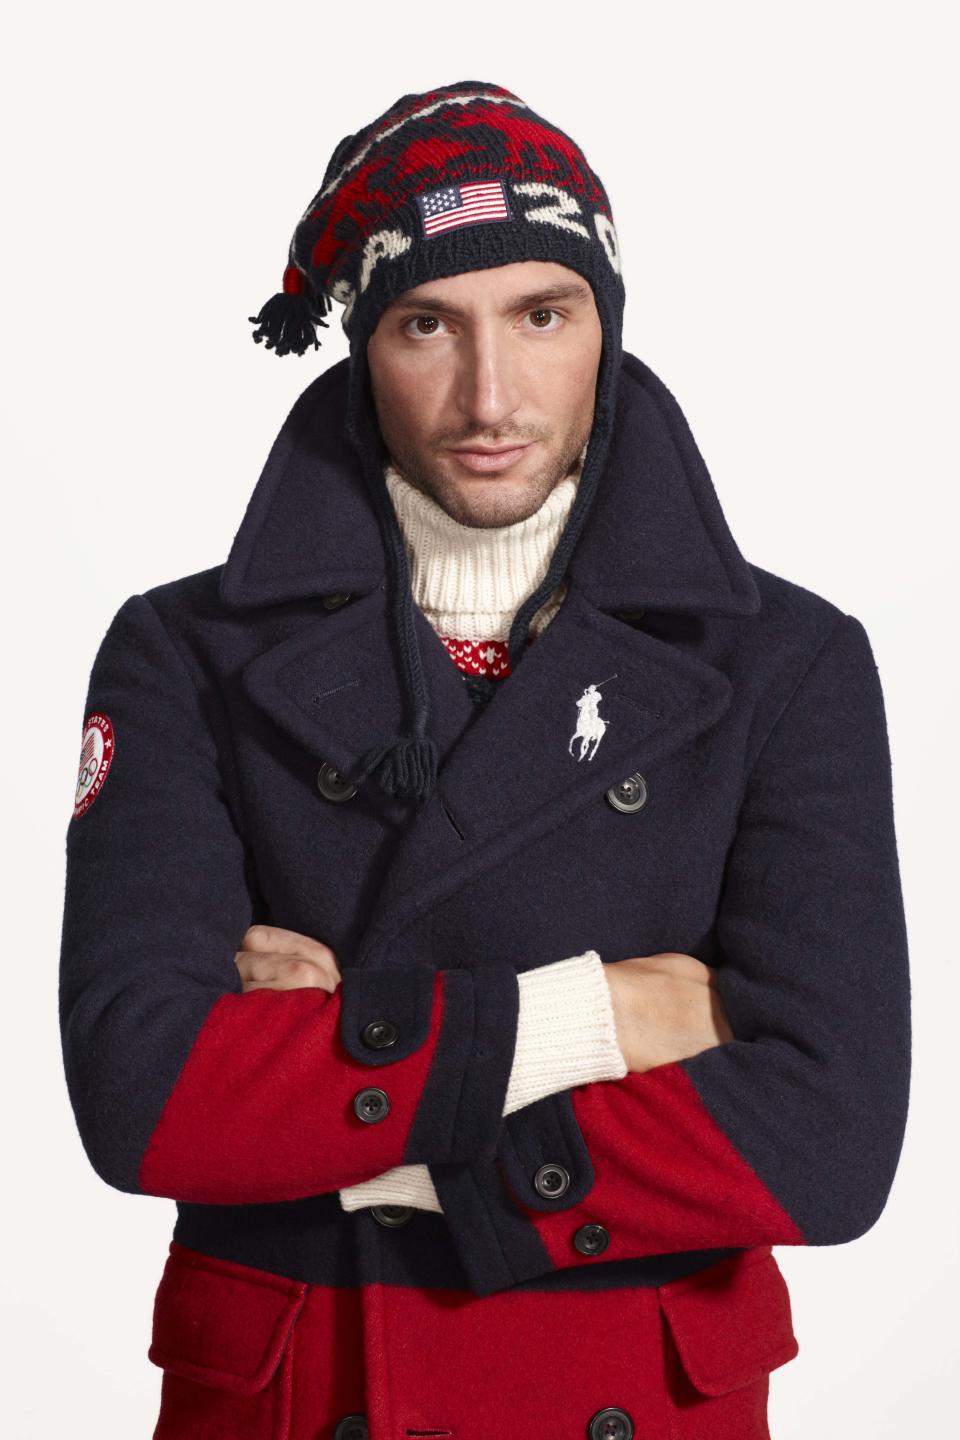 This undated product image provided by Ralph Lauren shows U.S. Olympic skater Evan Lysacek wearing fashion by designer Ralph Lauren for the 2014 Winter Olympics. Every article of clothing made by Ralph Lauren for the U.S. Olympic athletes in Sochi has been made by domestic craftsman and manufacturers. (AP Photo/Ralph Lauren)